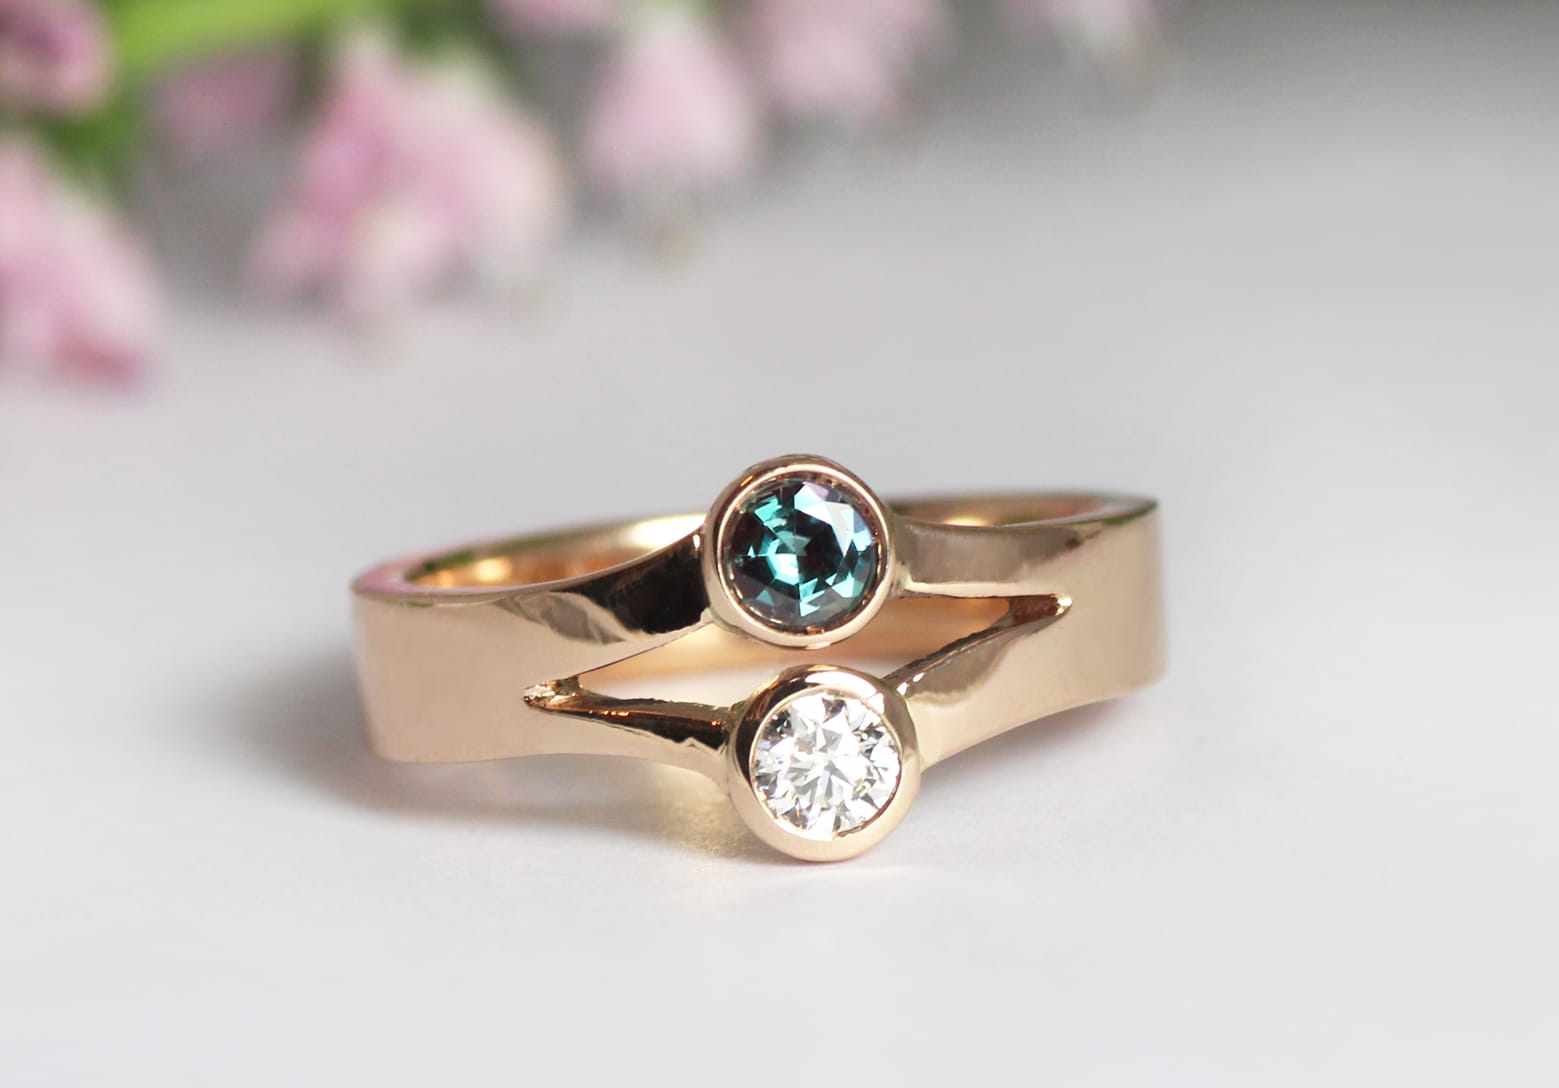 18ct Fairtrade gold with diamond and alexandrite by Zoe Pook Jewellery